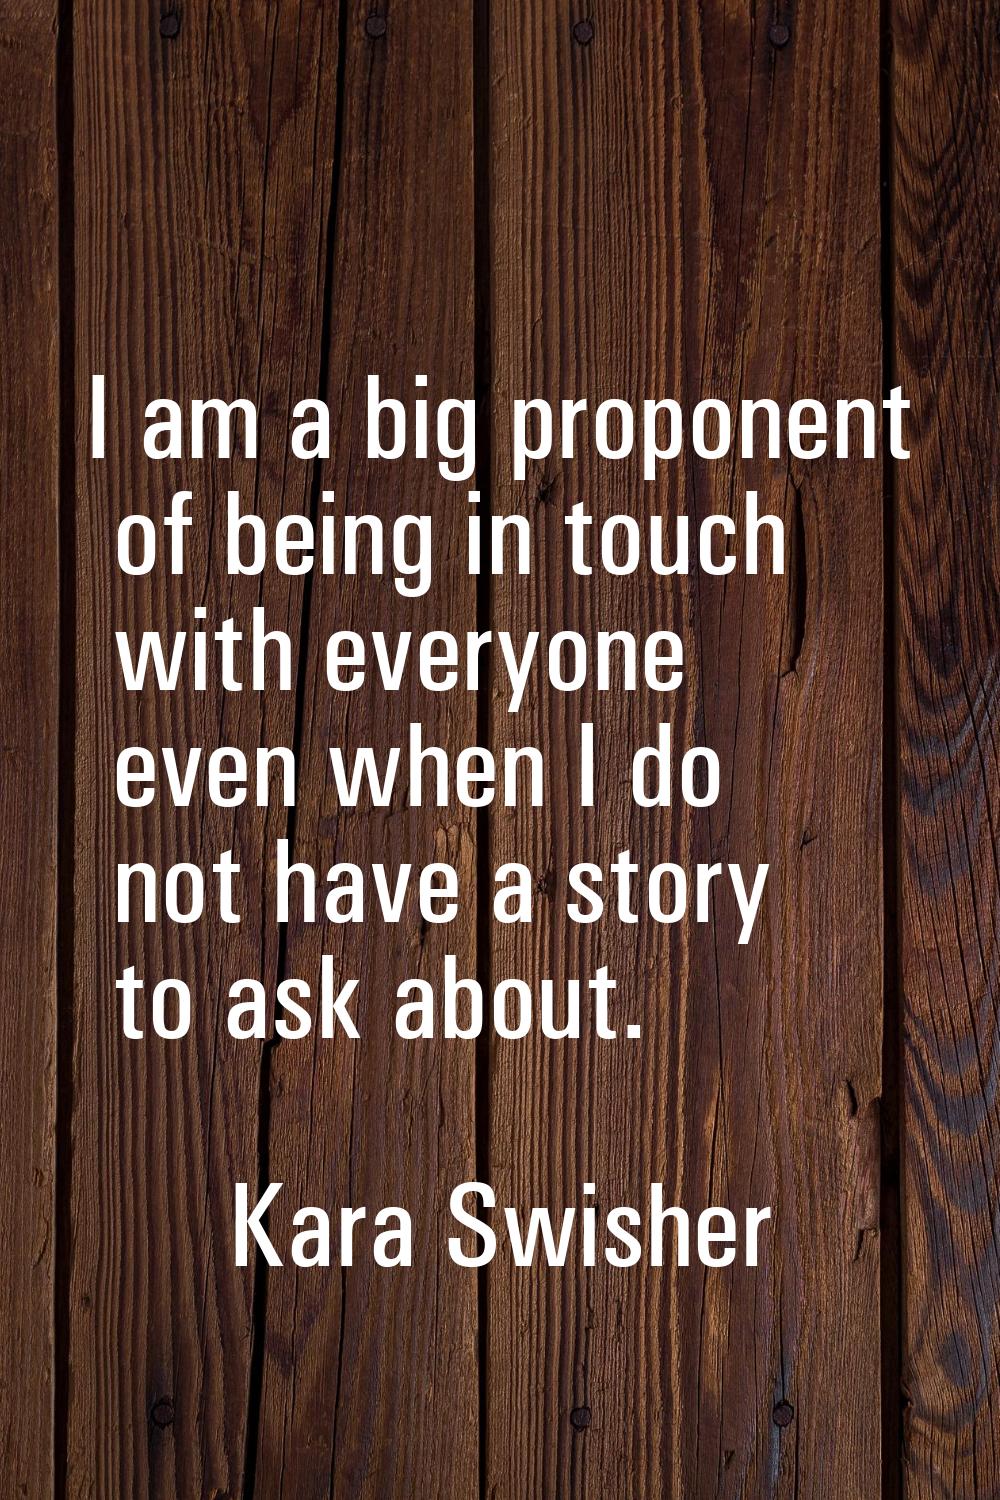 I am a big proponent of being in touch with everyone even when I do not have a story to ask about.